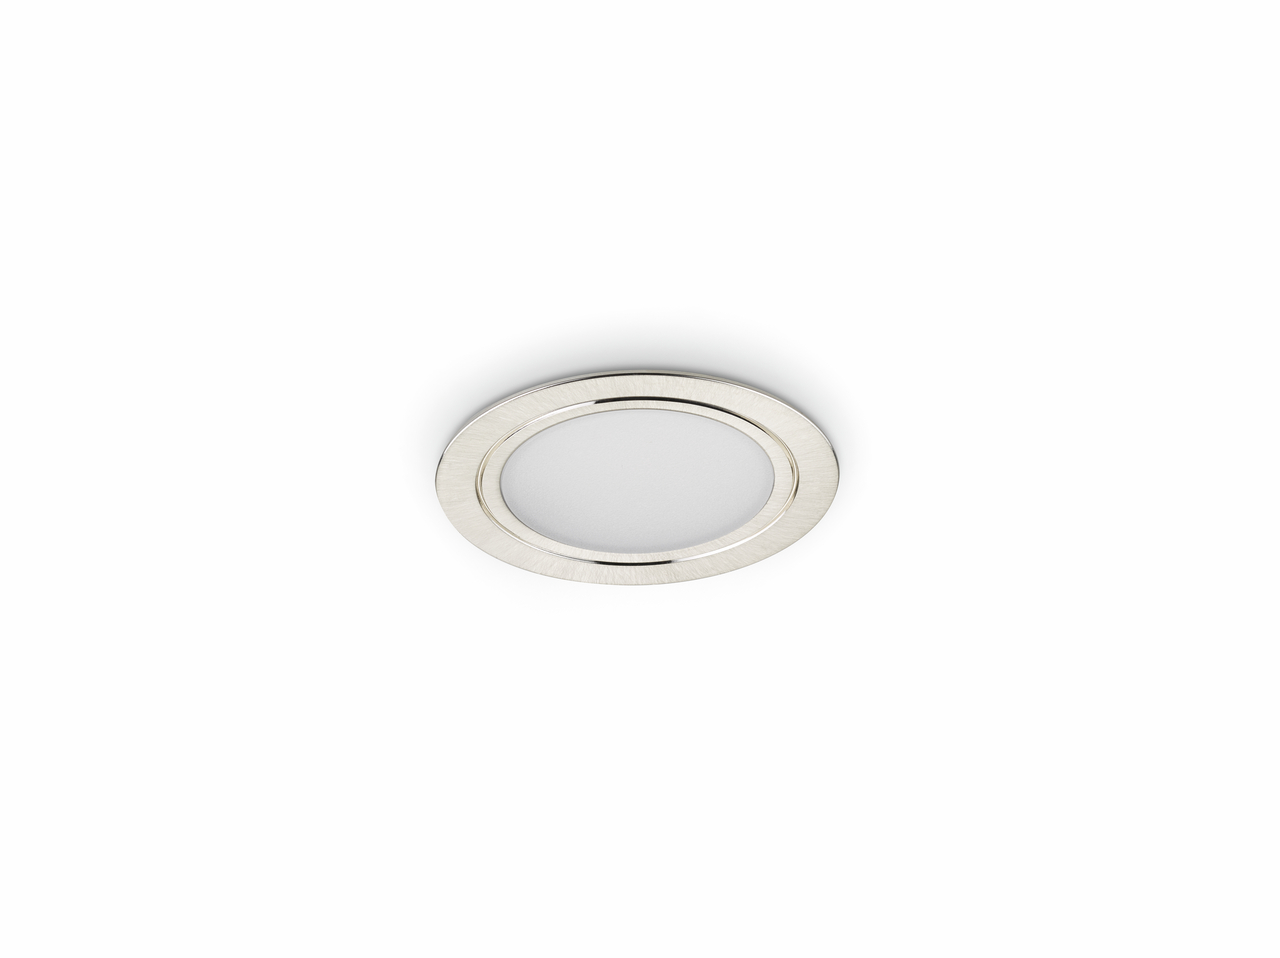 Anelli colour change LED, Built-in lamp, stainless steel coloured